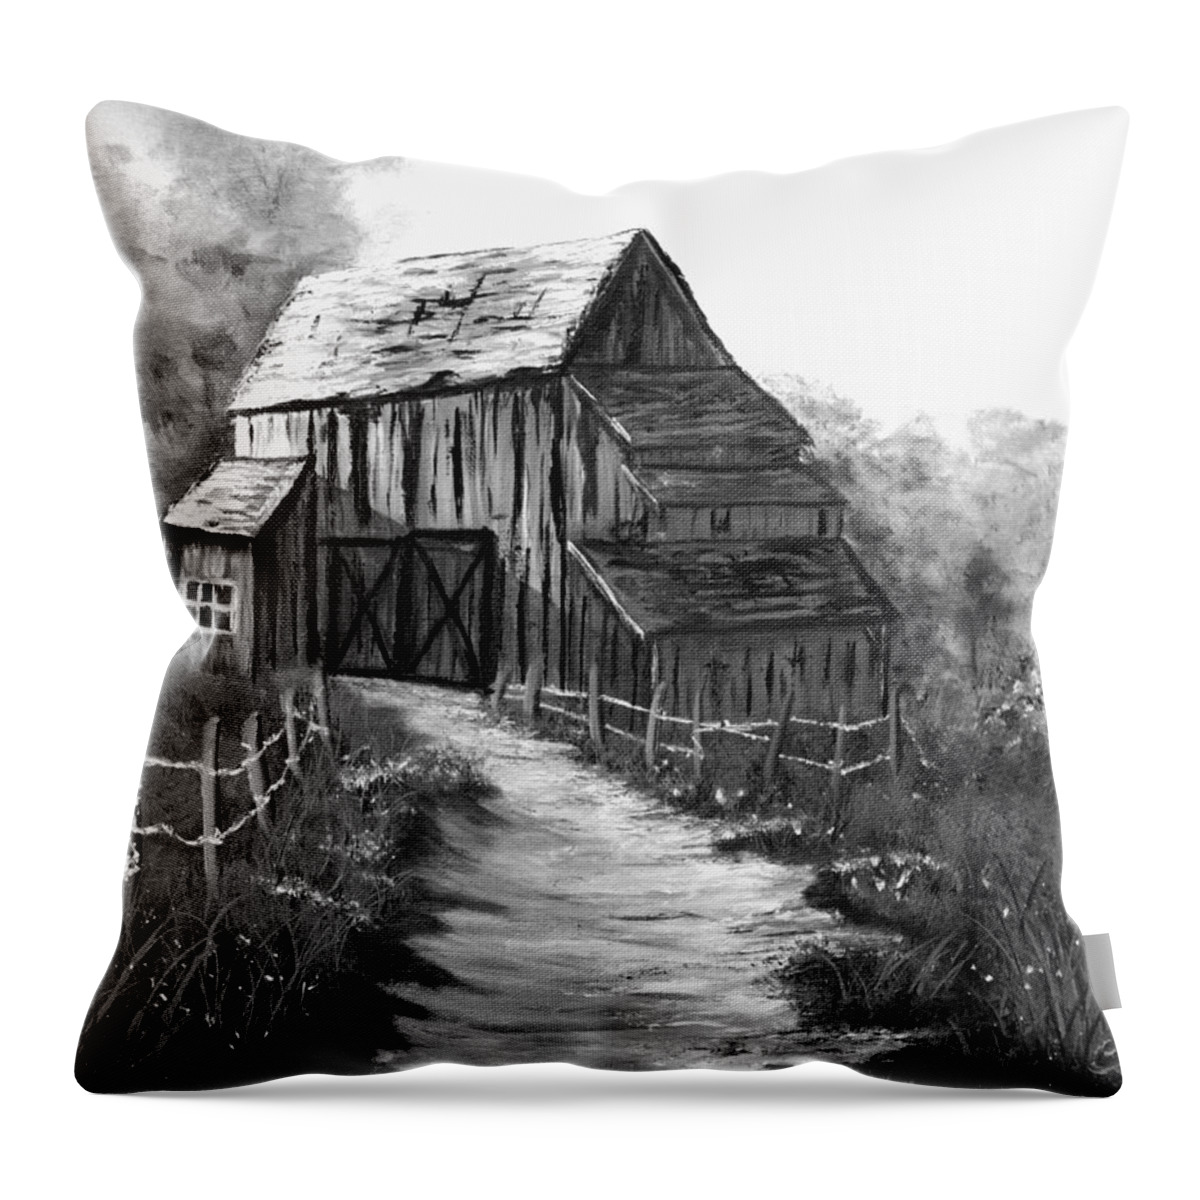 Black And White Throw Pillow featuring the painting Wooden Barn In Black And White by Claude Beaulac